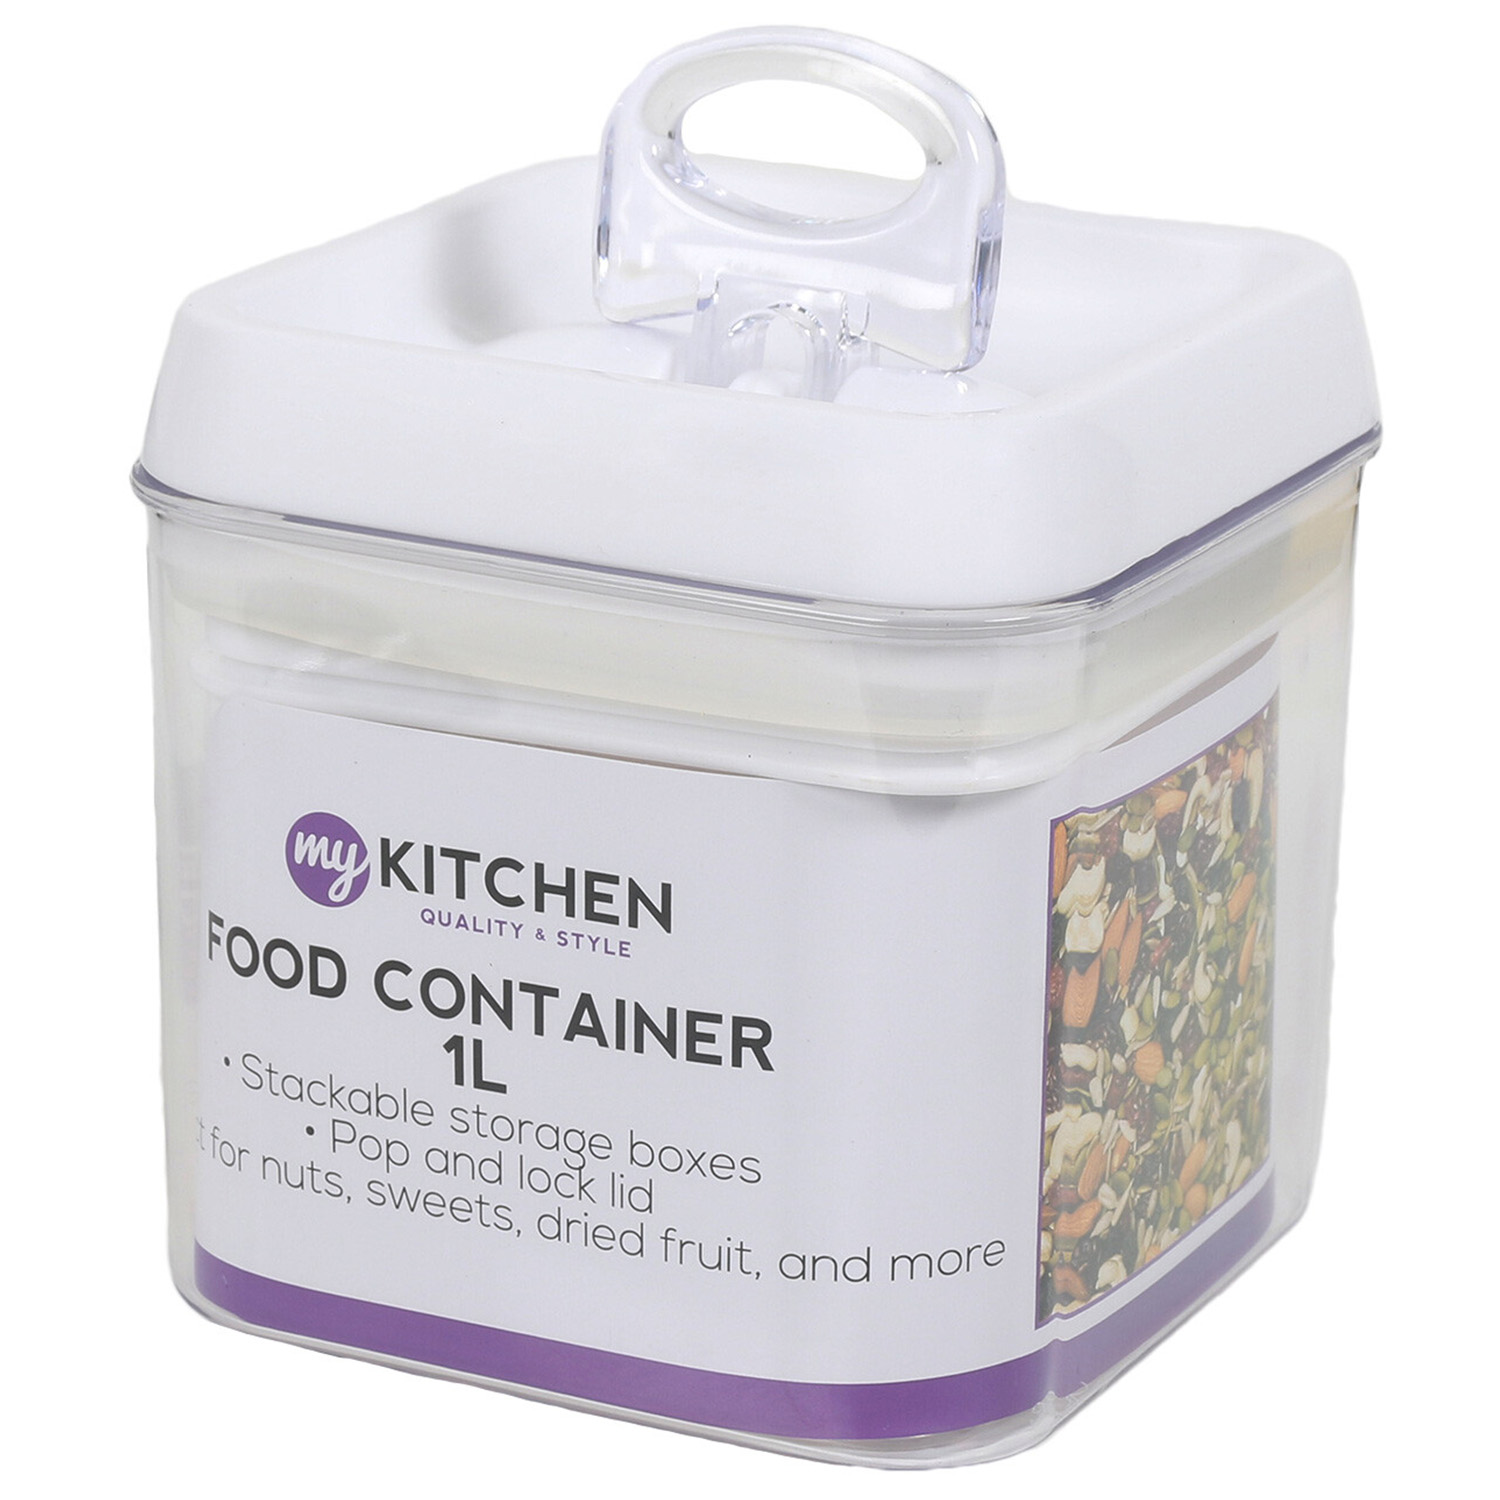 Single My Kitchen 1L Airtight Food Container in Assorted styles Image 1